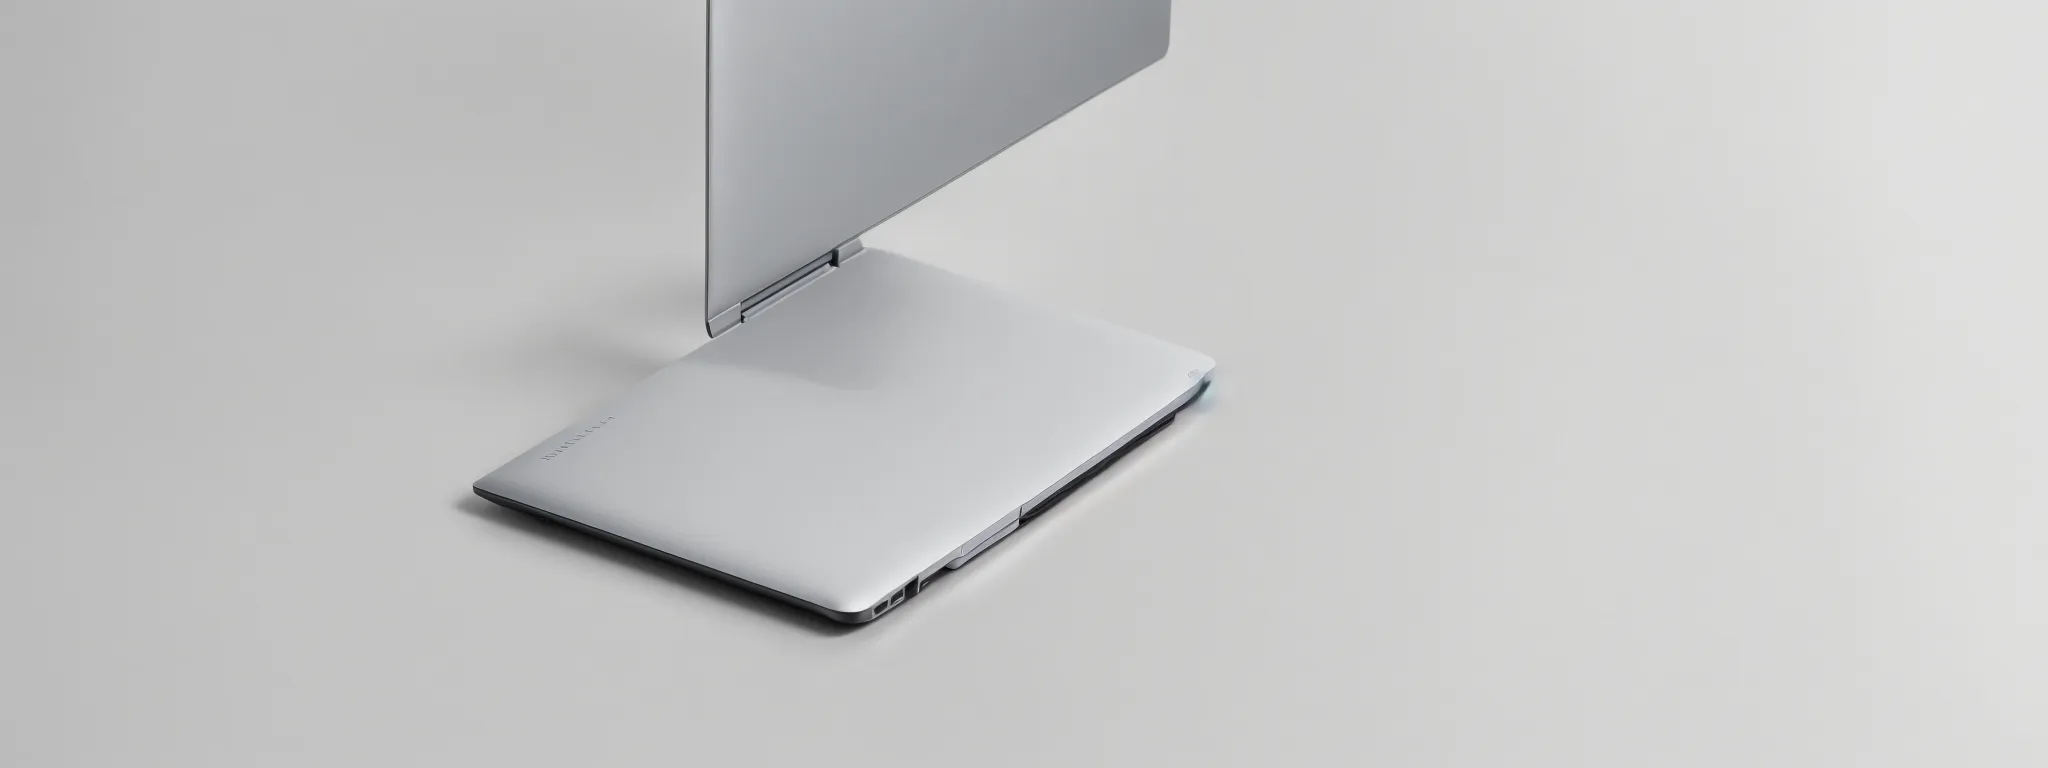 a sleek laptop open to a clean, uncluttered email interface against a simple, monochromatic background.